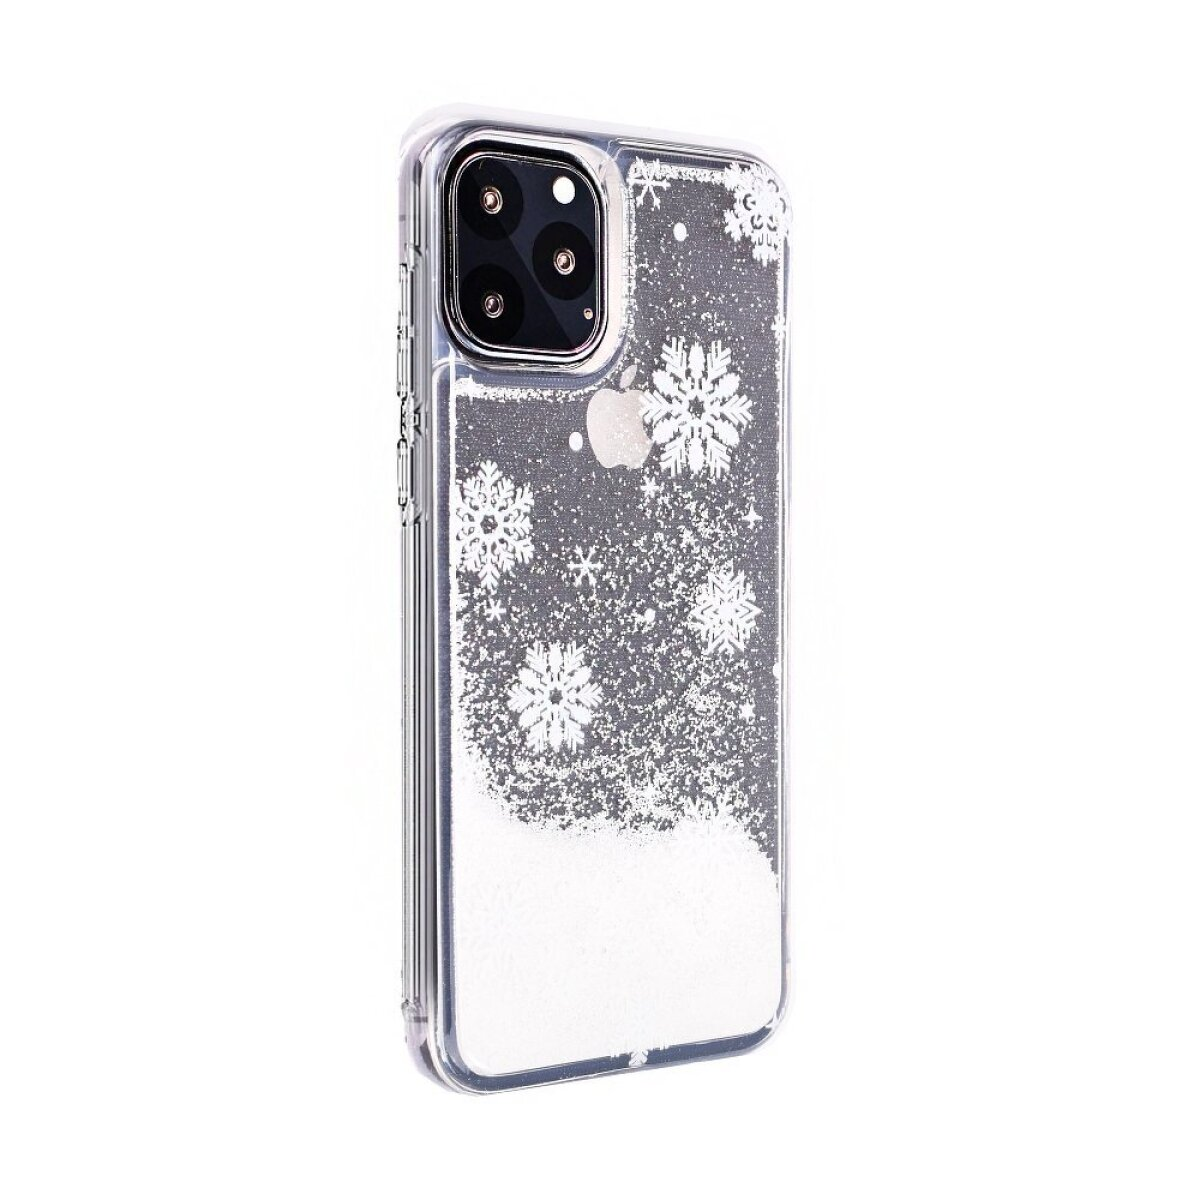 FORCELL Winter iPhone Max, Full Max available Not snowflakes, 11 Pro Cover, Apple, Pro iPhone 11